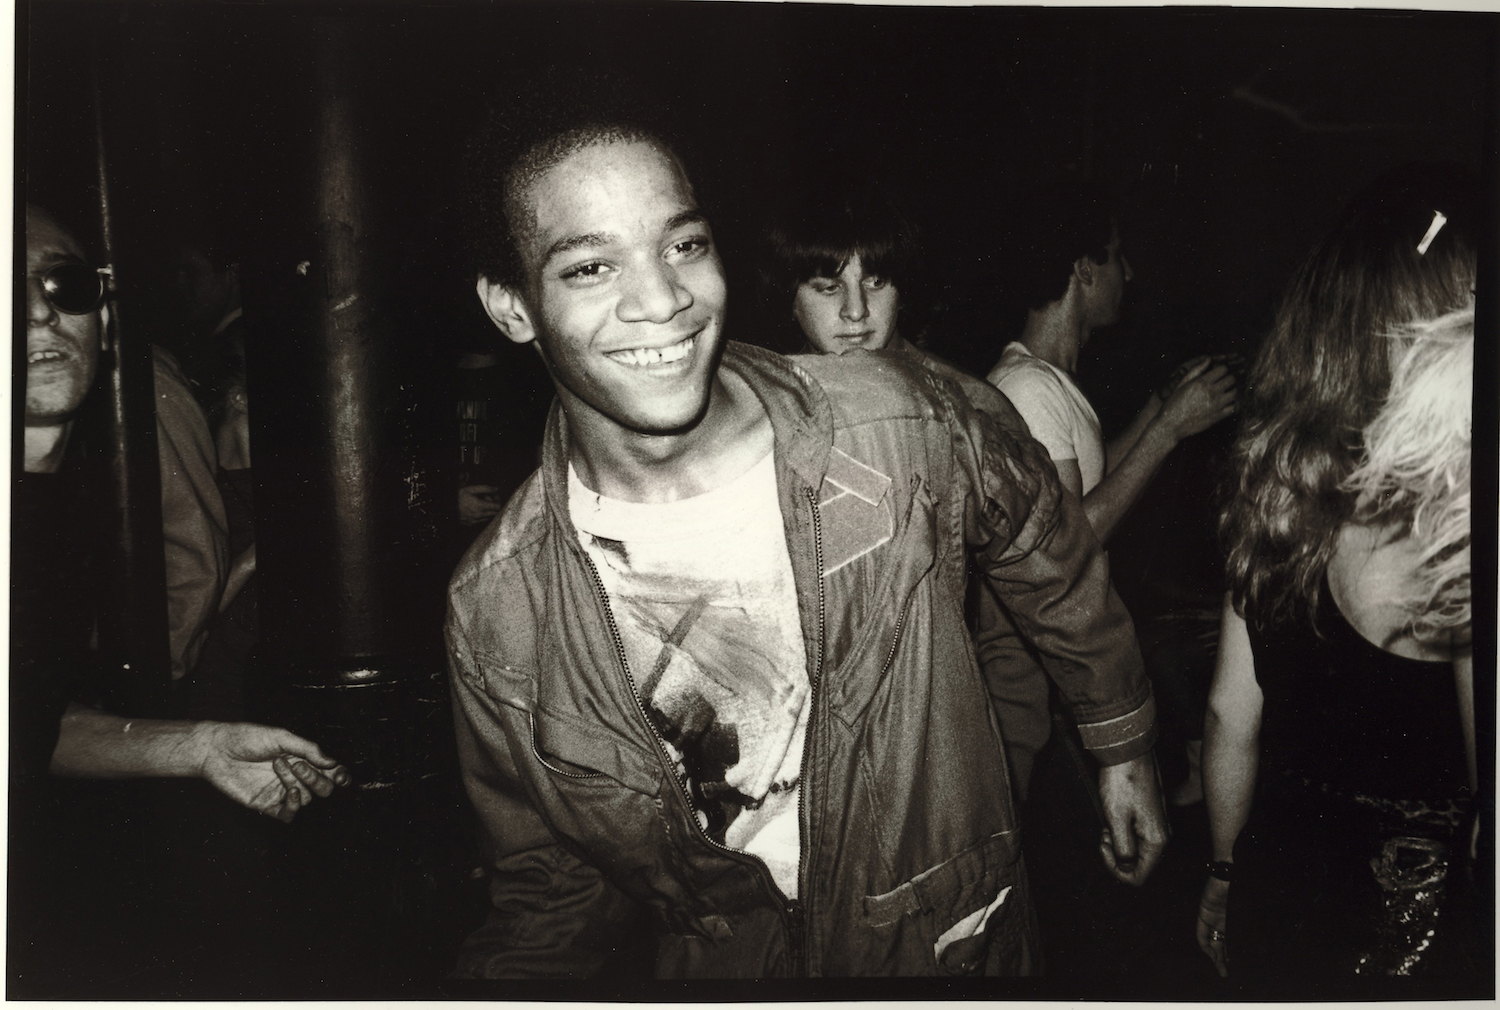 Jean-Michel Basquiat dancing at the Mudd Club with painted t-shirt, 1979 Courtesy Nicholas Taylor